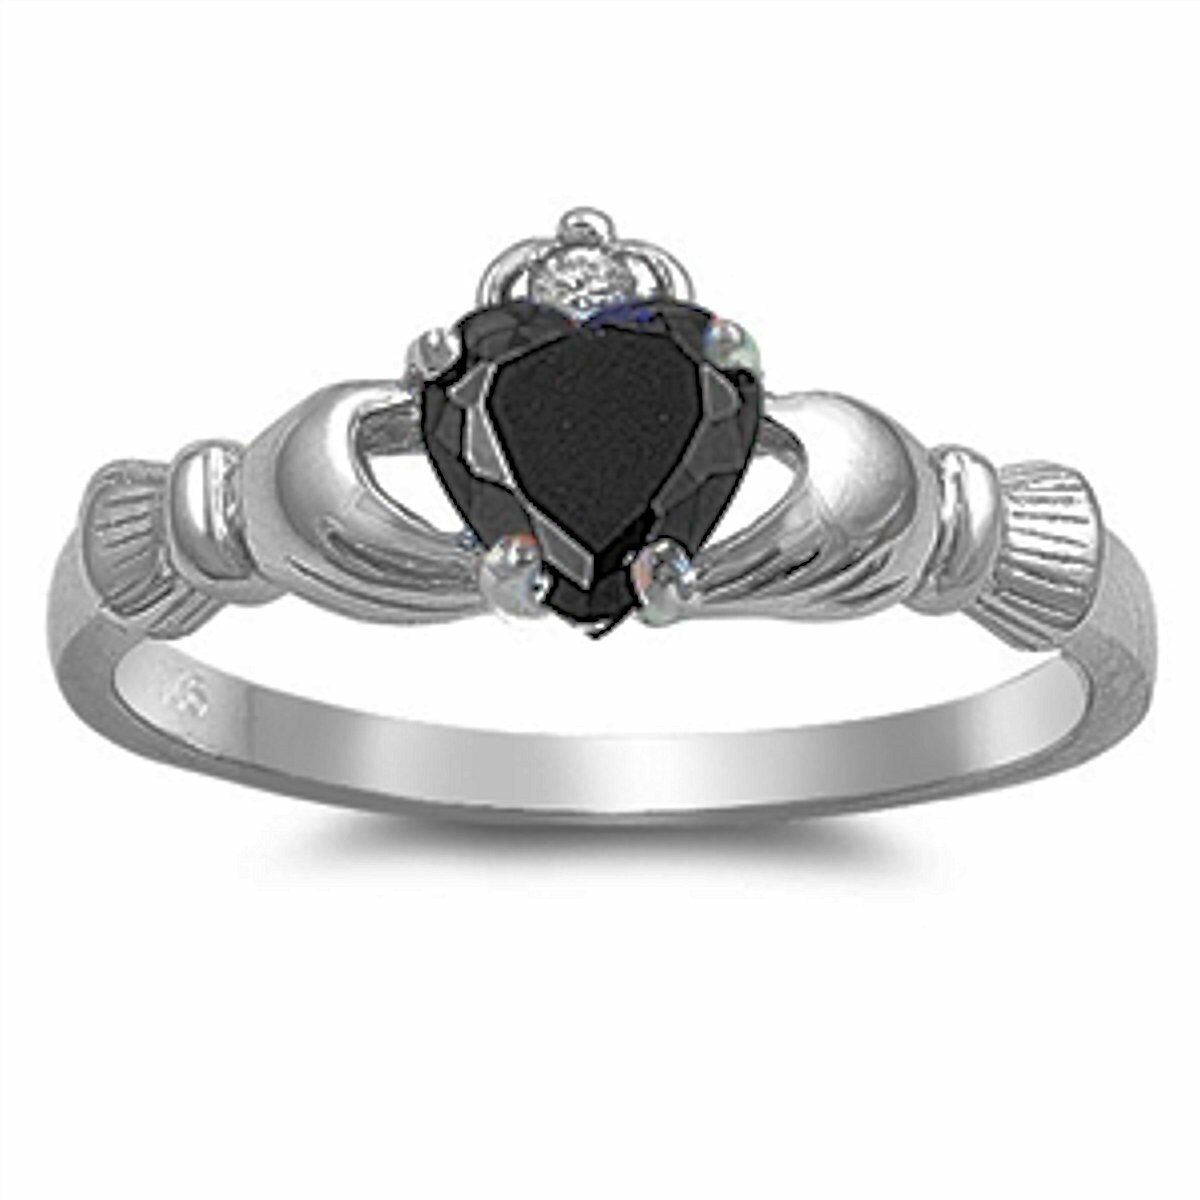 Black Cubic Zirconia Claddagh Ring Sterling Silver